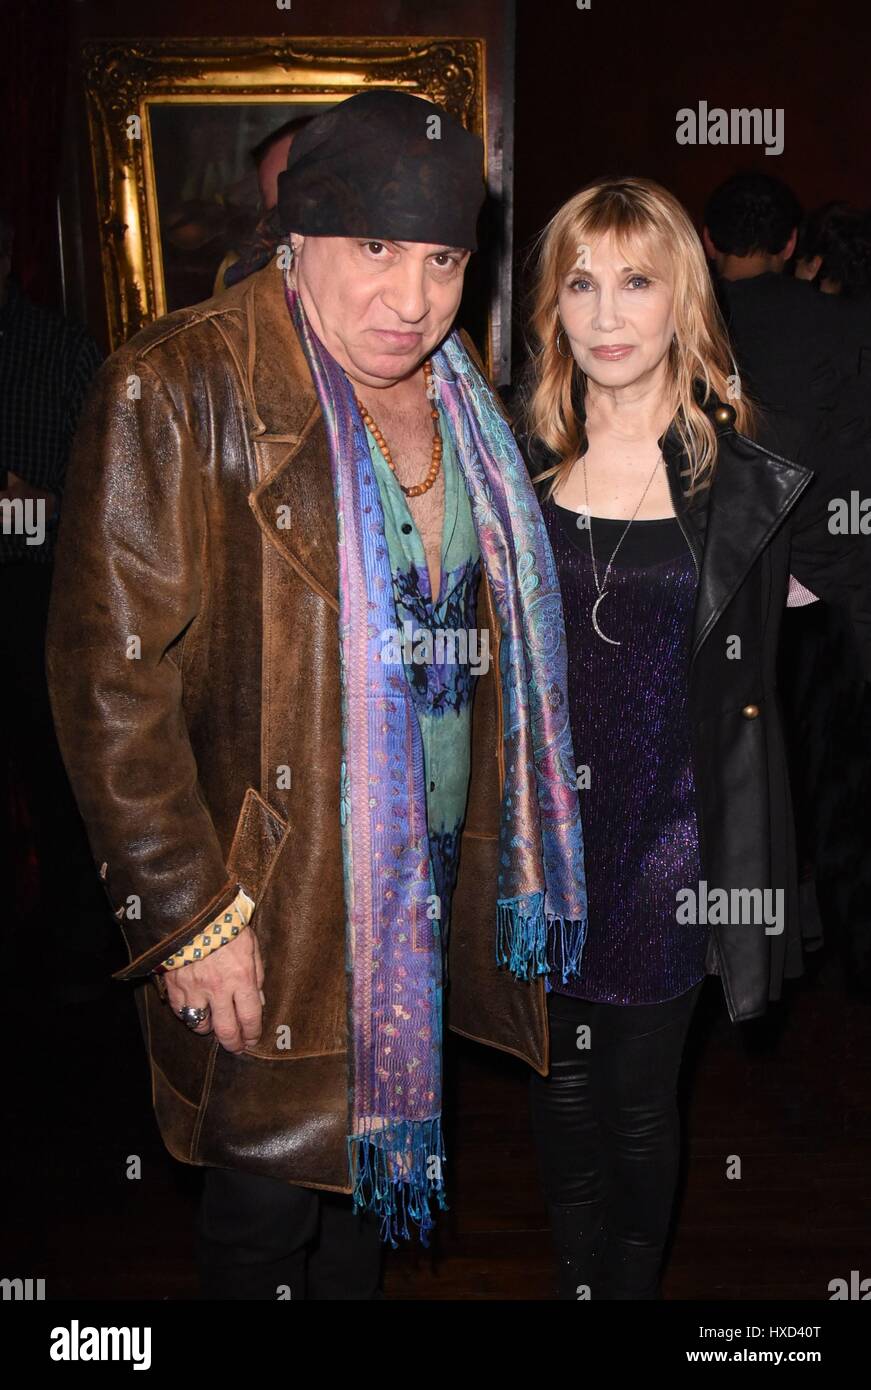 New York, NY, USA. 27th Mar, 2017. Little Steven Van Zandt, Maureen Van Zandt at arrivals for Micky Dolenz Private Party, The Cutting Room, New York, NY March 27, 2017. Credit: Derek Storm/Everett Collection/Alamy Live News Stock Photo